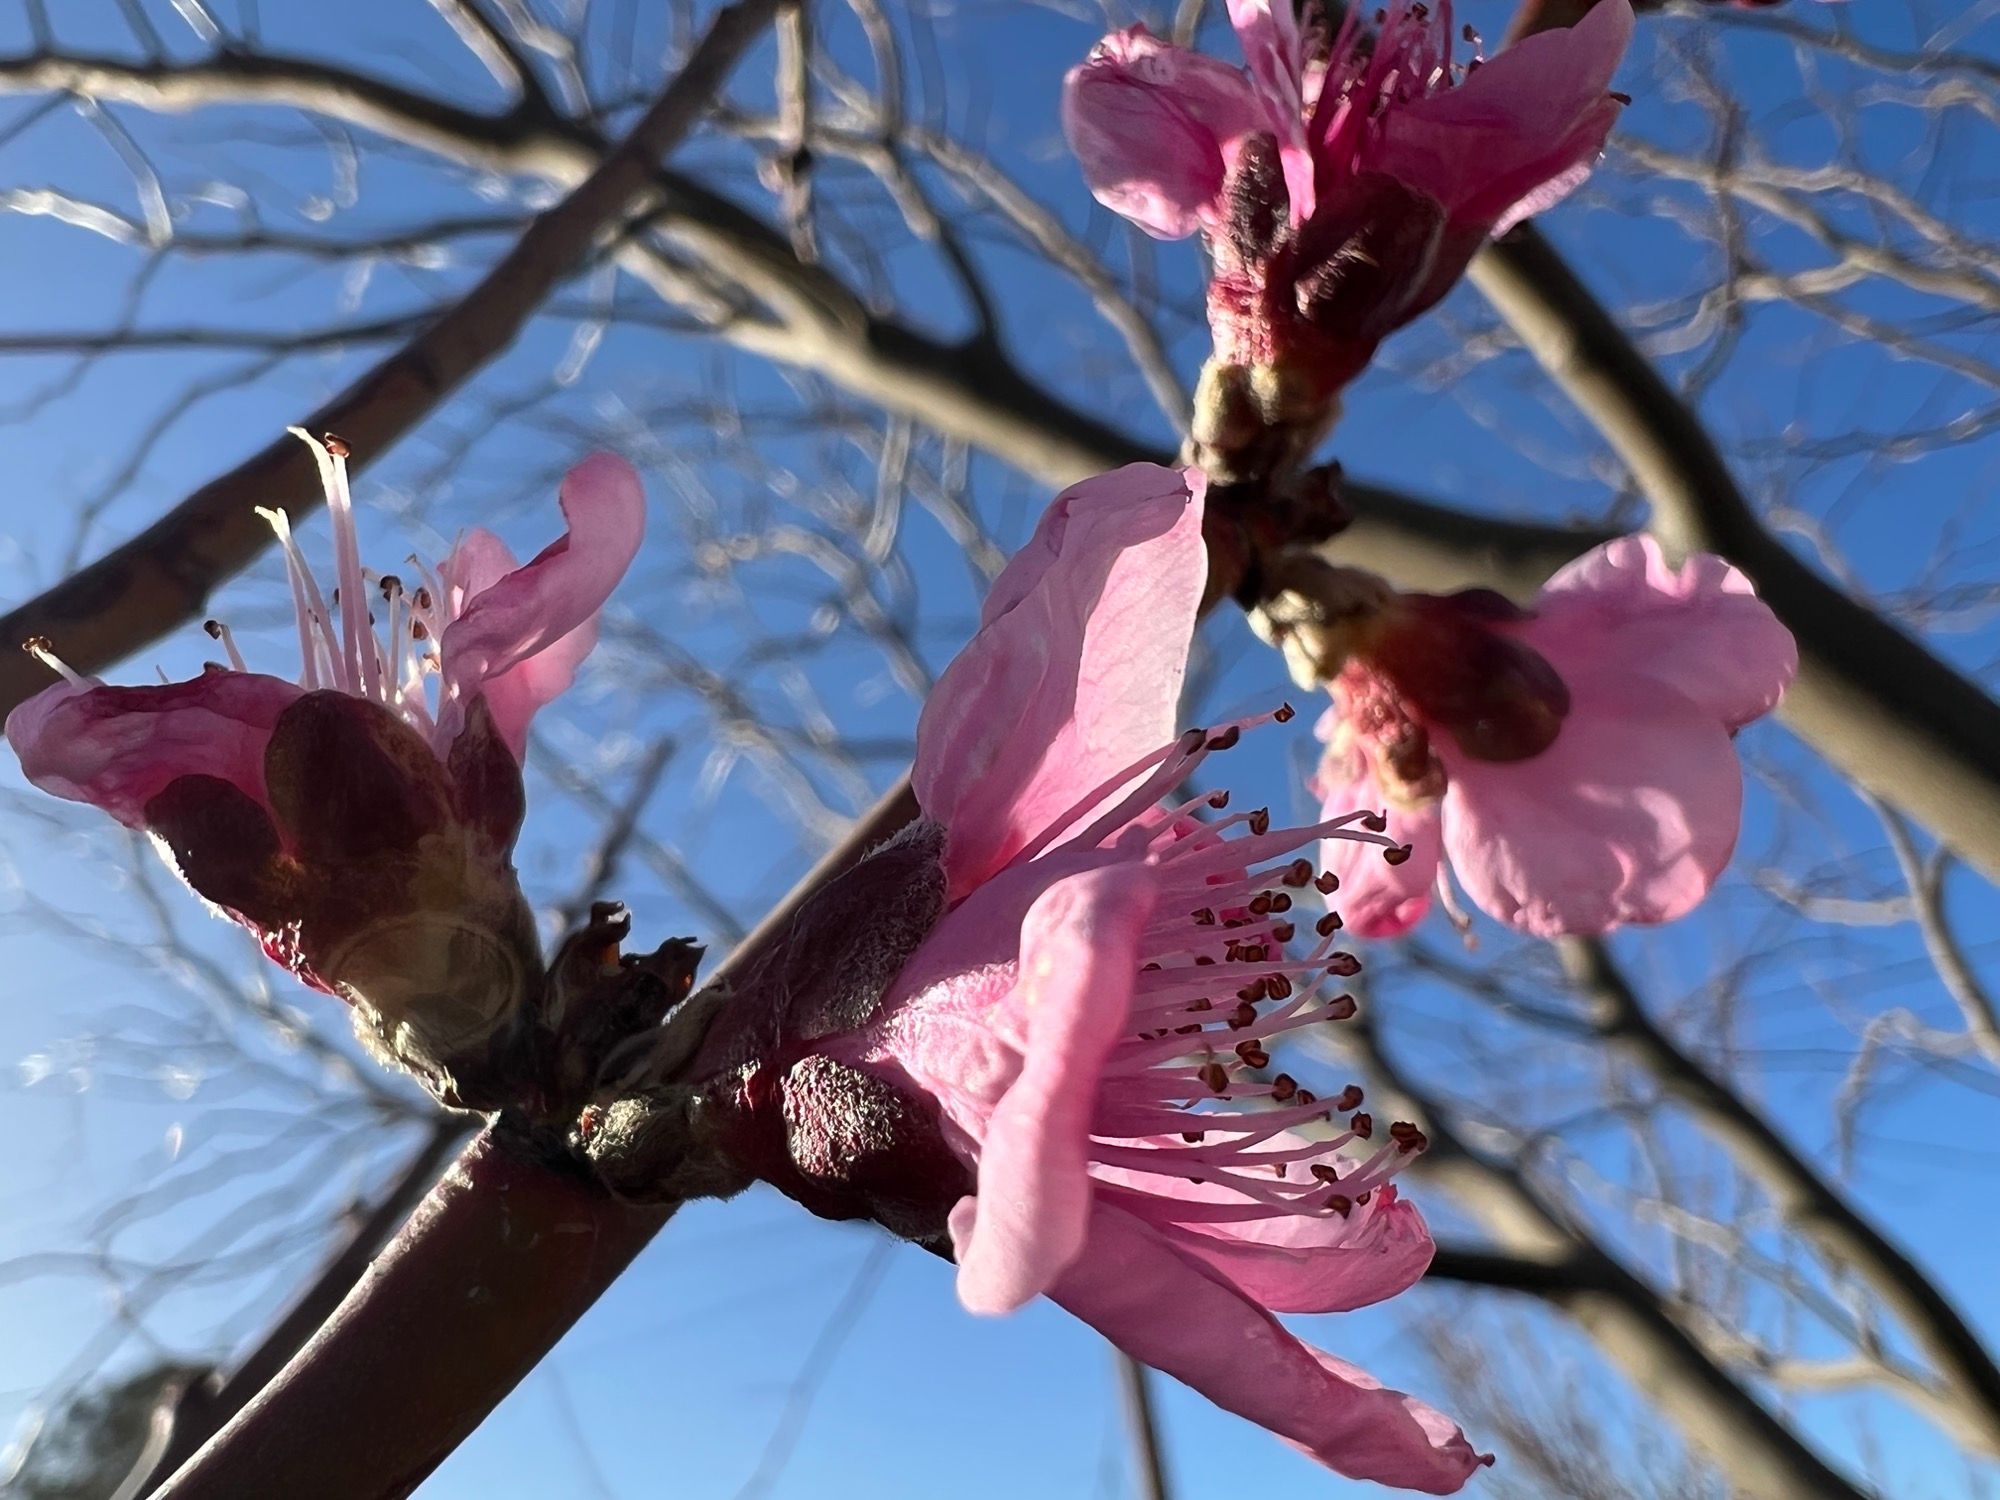 A close up image of pink peach blossoms on a branch with blue sky and more branches in the background 